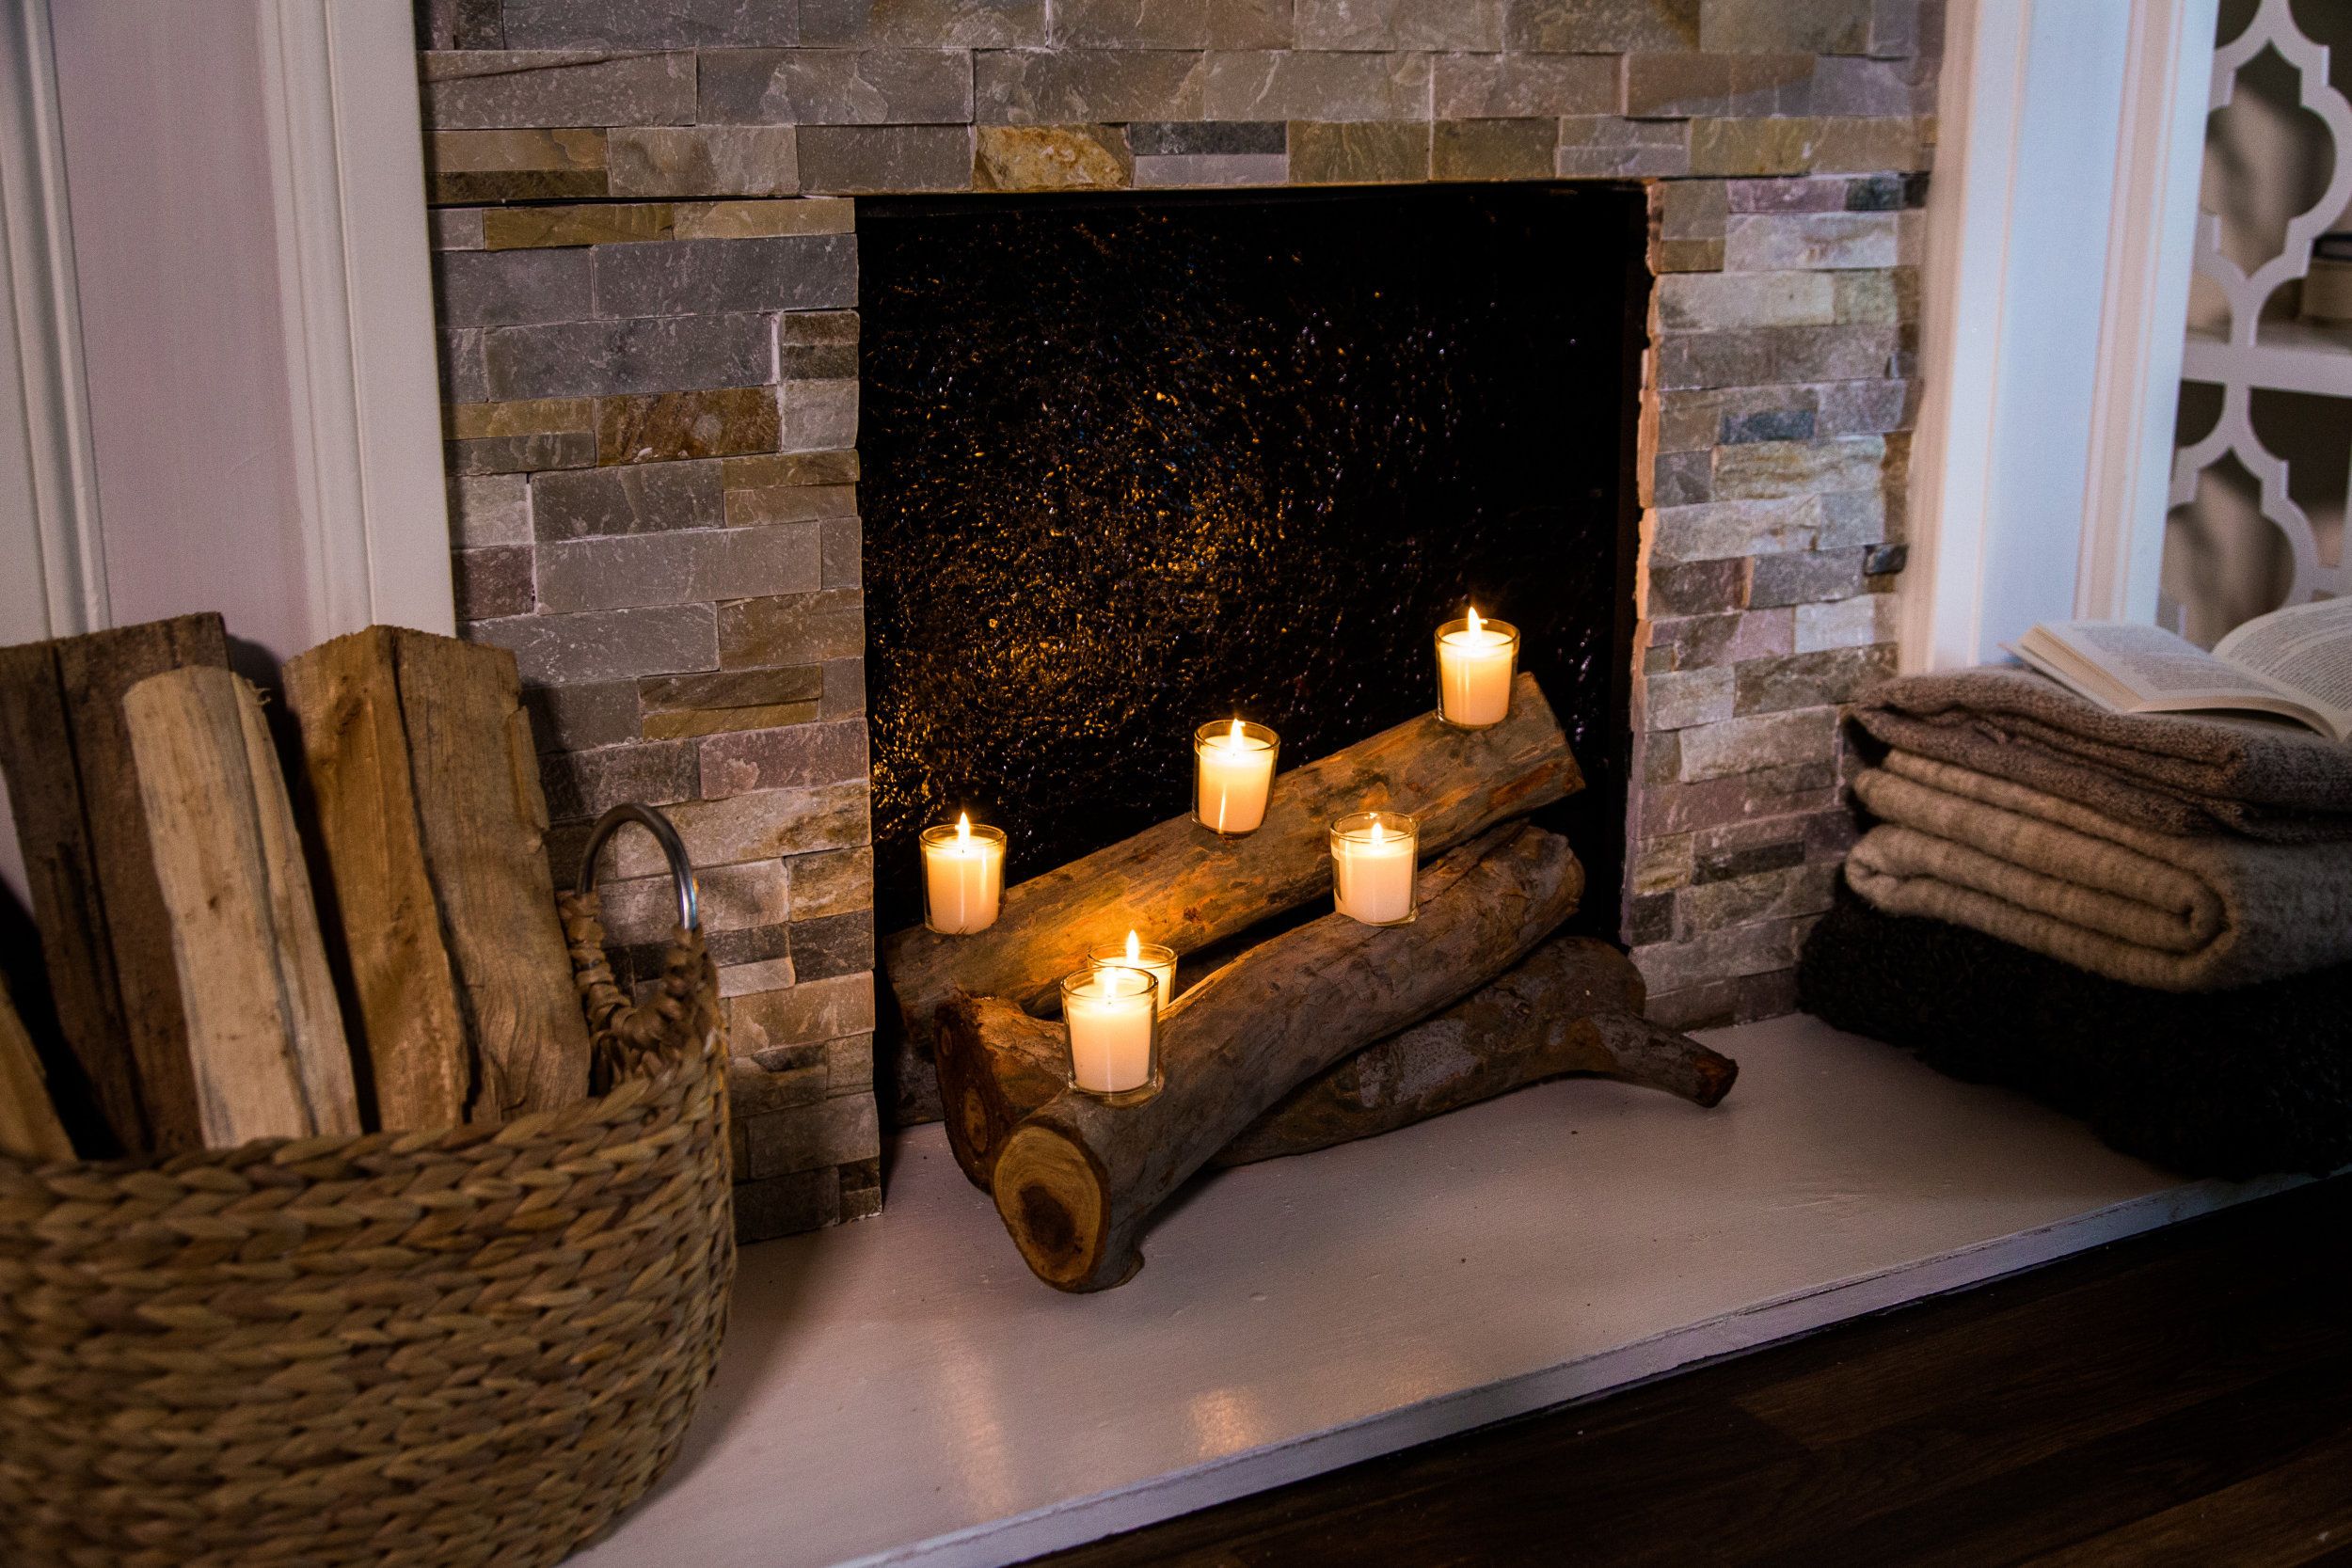 Best Way to Start A Fire In A Fireplace New Diy Faux Fireplace Logs Home & Family